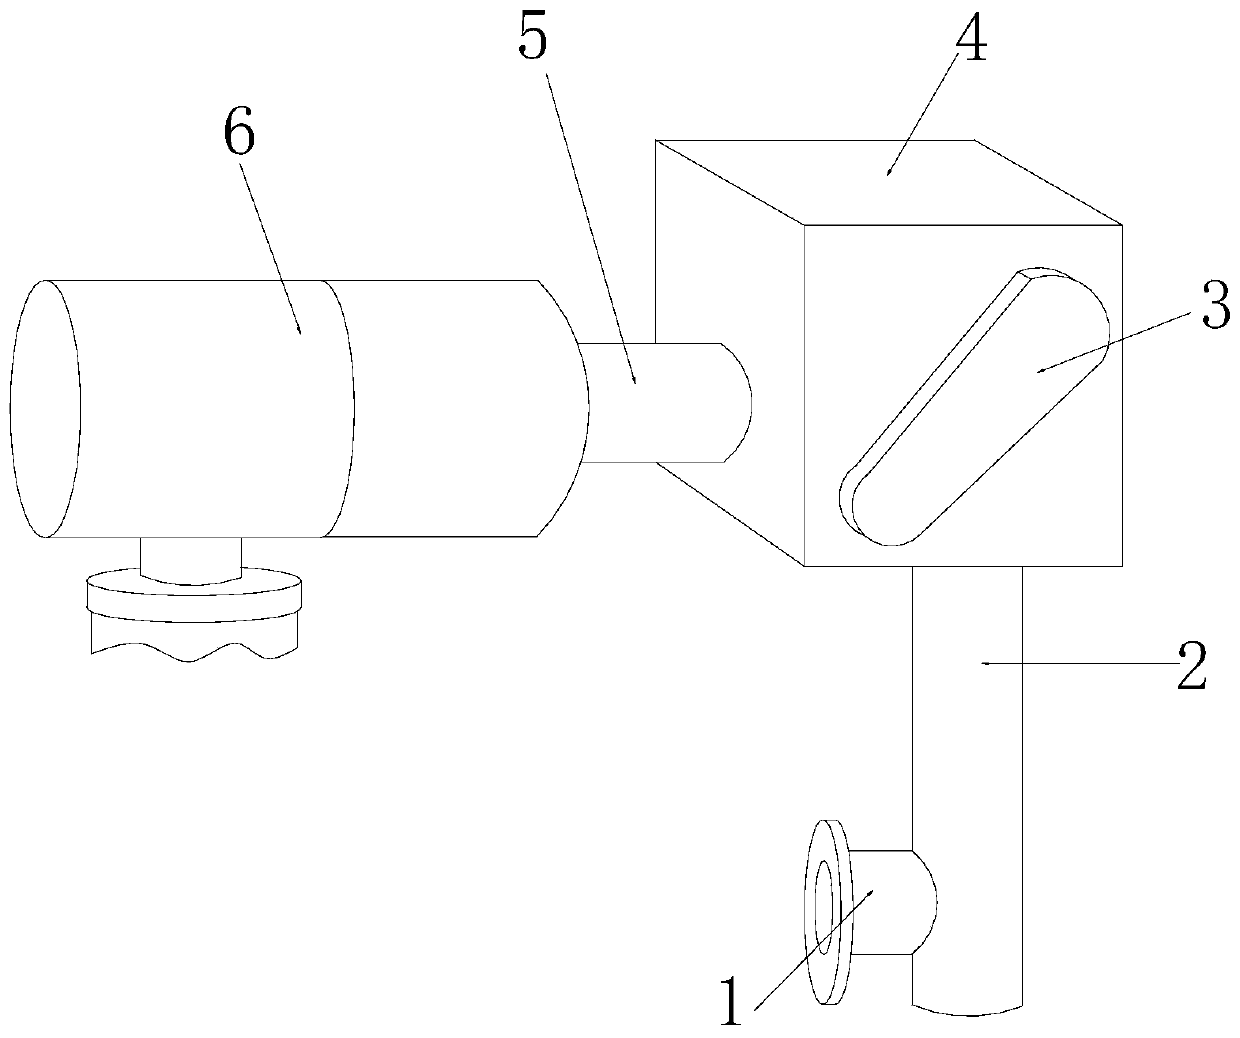 Automatic material leakage device applied to the unloading of feed transport vehicles